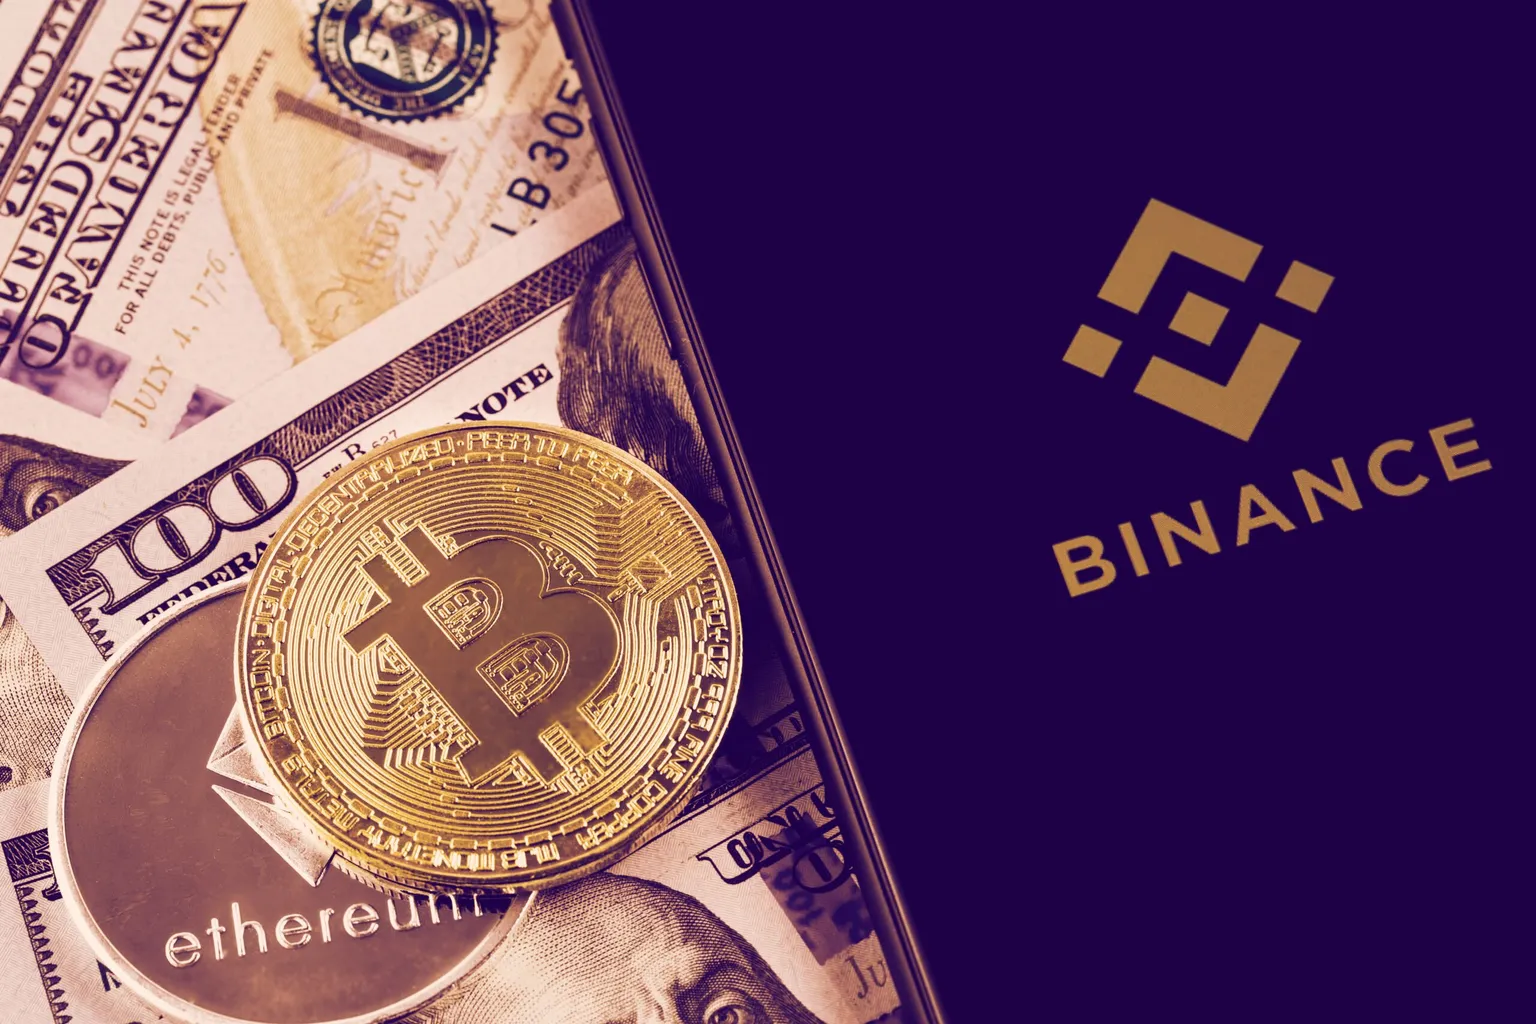 Binance expands its Bitcoin and crypto offering in Australia